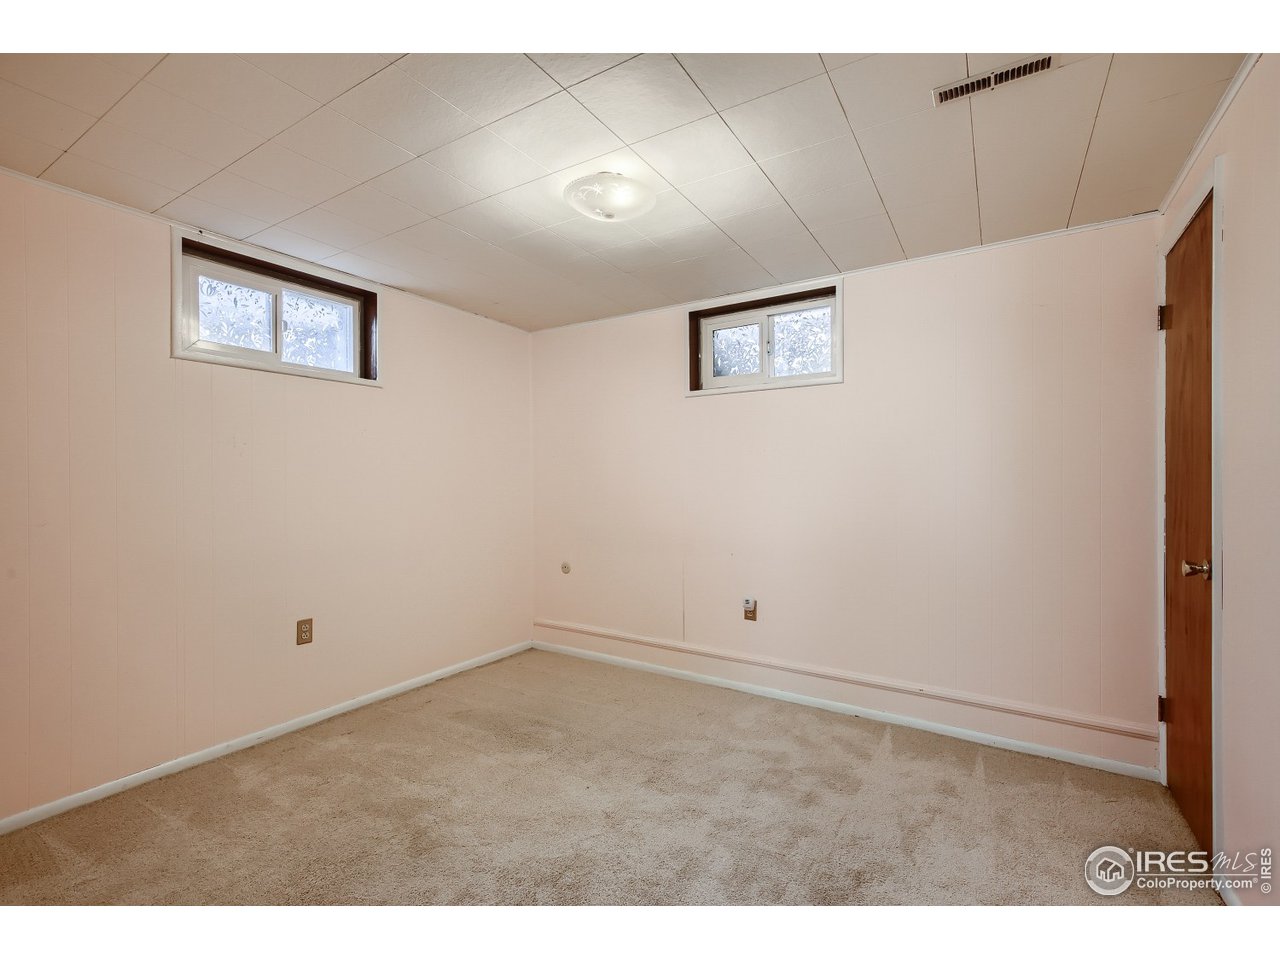 Additional bed, office, studio, just off the large open basement area.